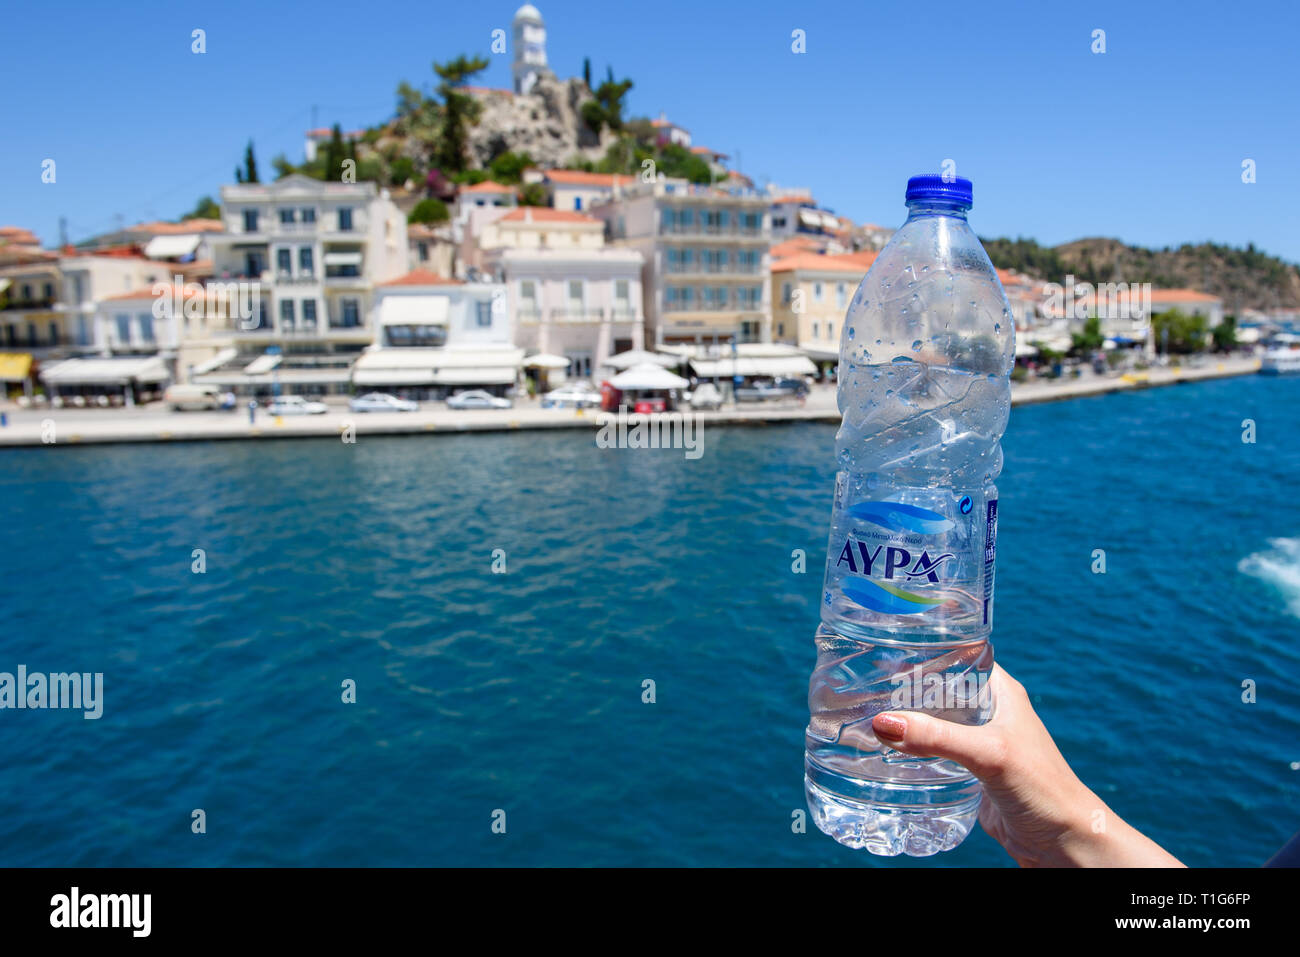 16.06.2016. POROS ISLAND, GREECE.  A bottle of plastic AYPA mineralwater in hands. Poros island at background. Cruise with ferry. Stock Photo